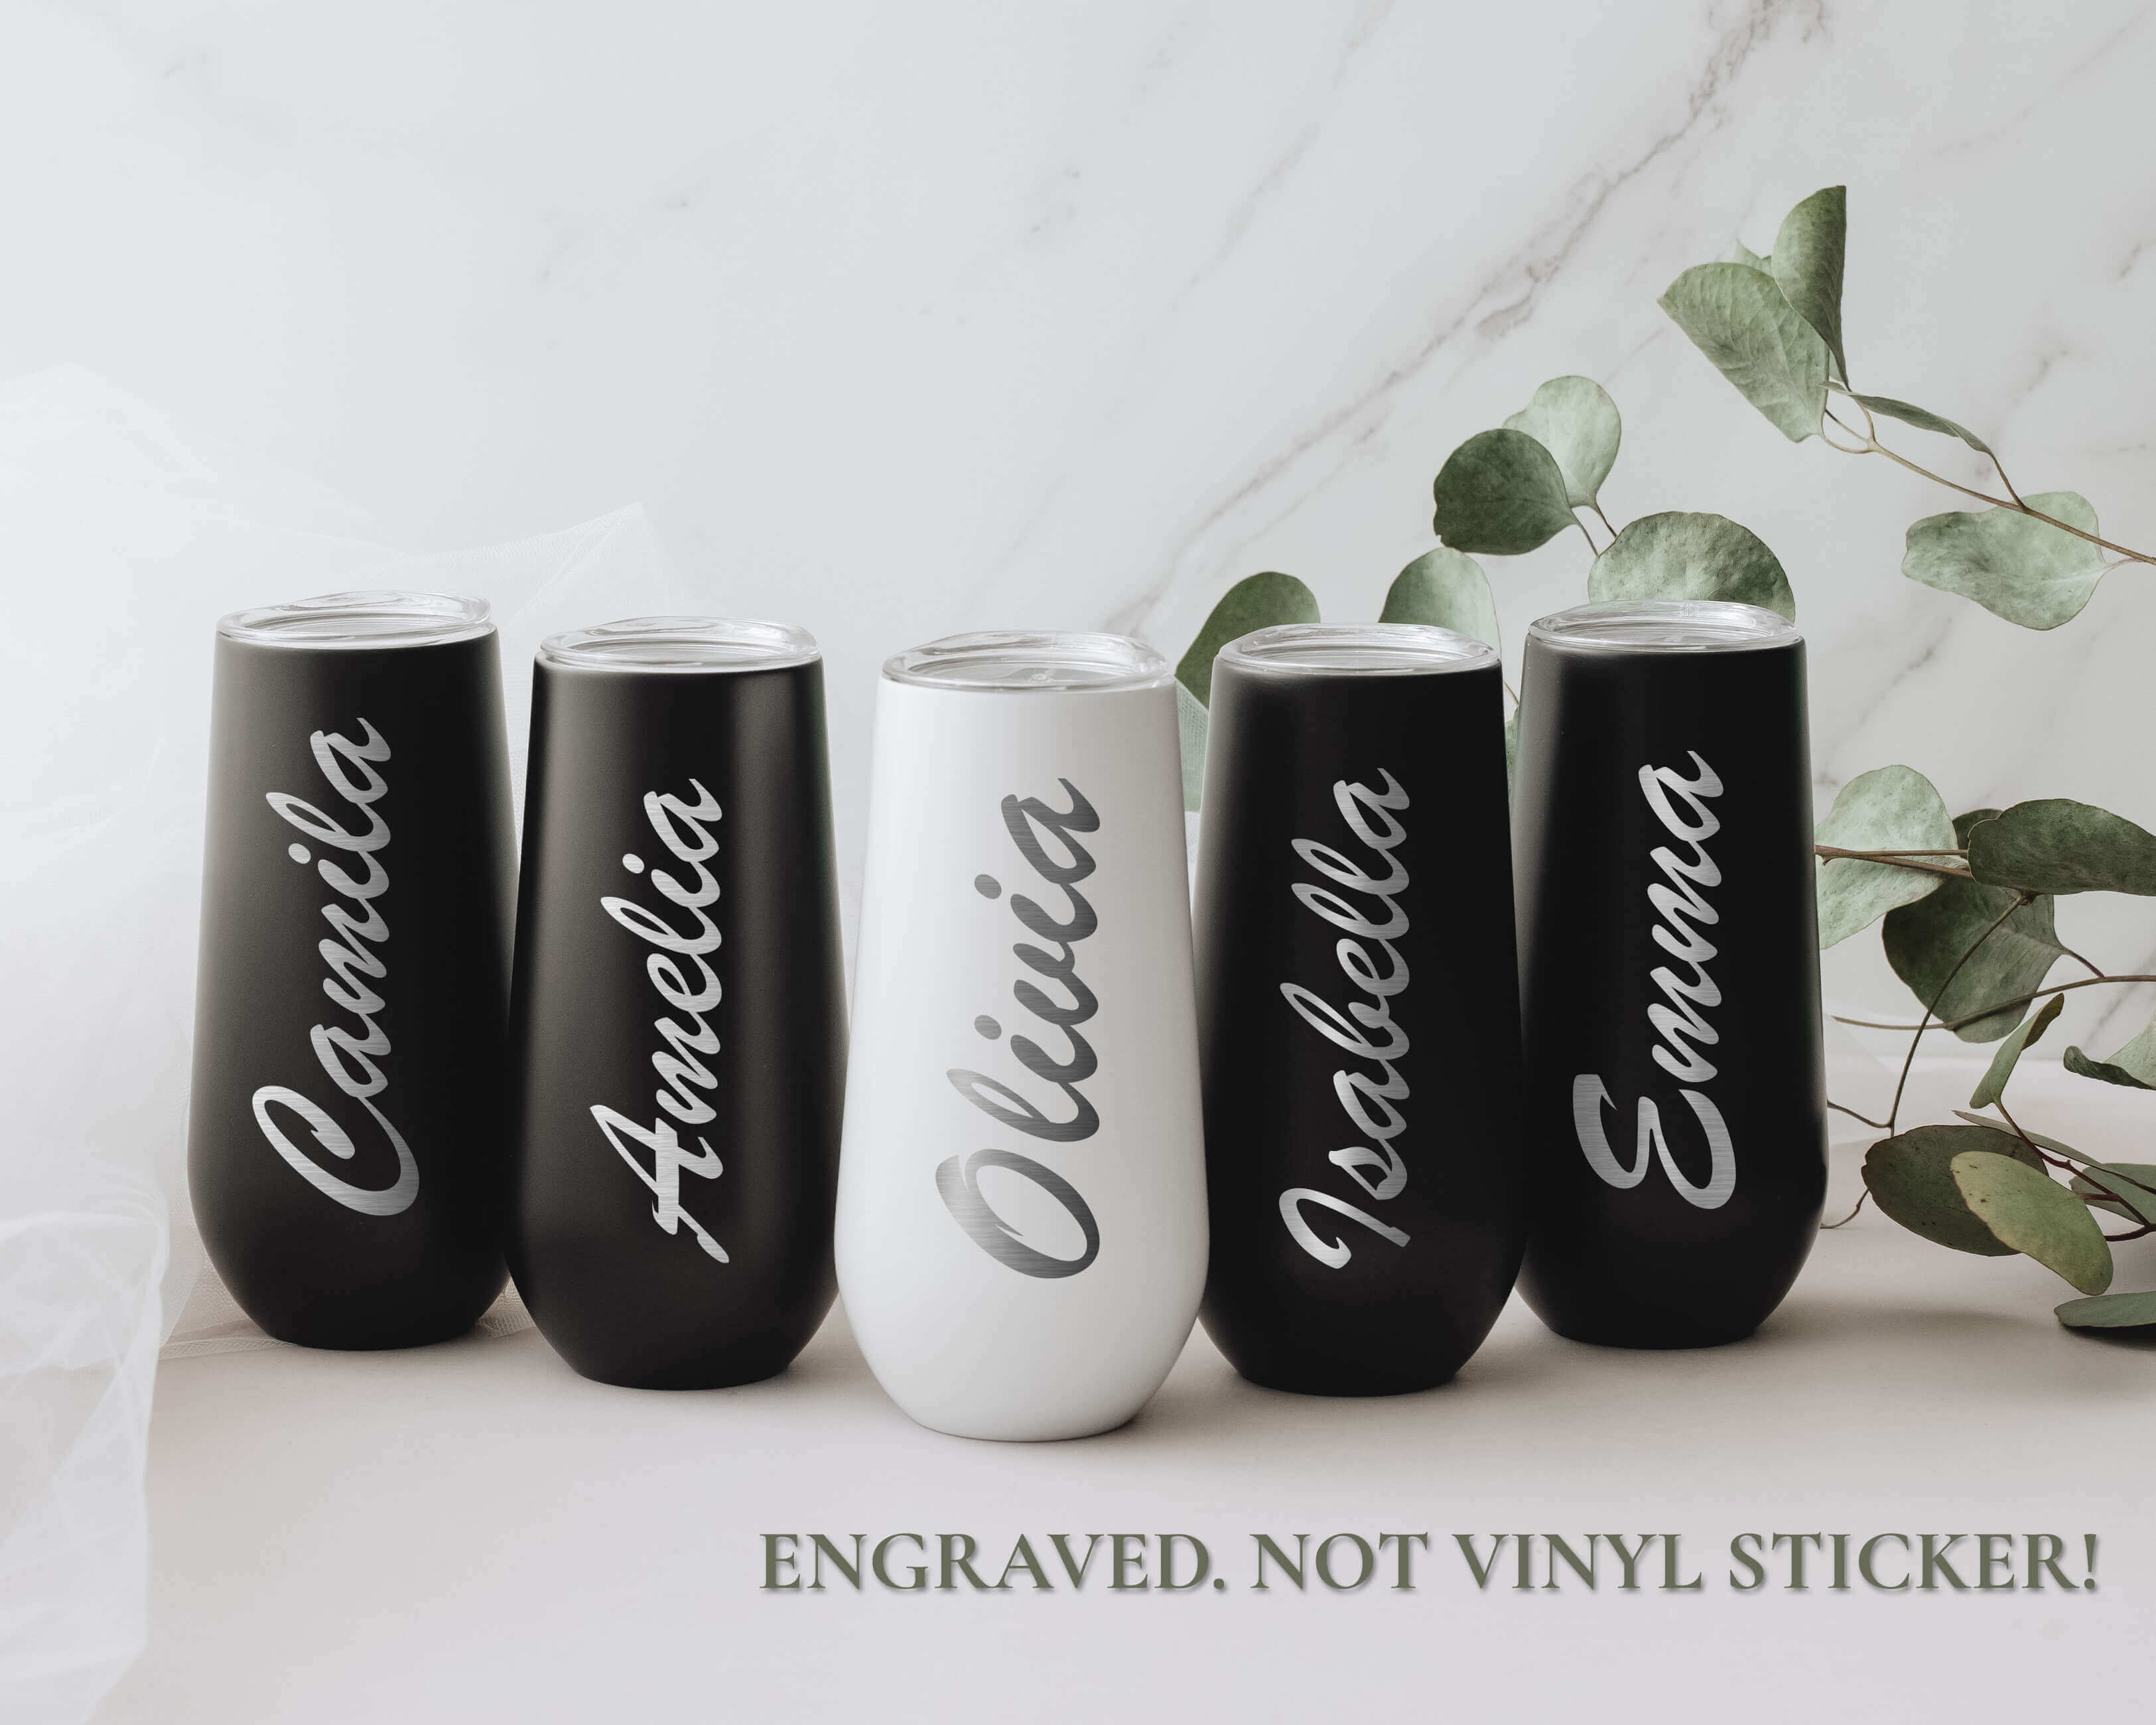 Bridesmaid Tumbler - Customize bridesmaid gifts with personalized black and white bridesmaid tumblers, available in gold, black, silver, rose gold, and white colors. These tumblers feature their names, making them the perfect addition to any bridesmaid gi